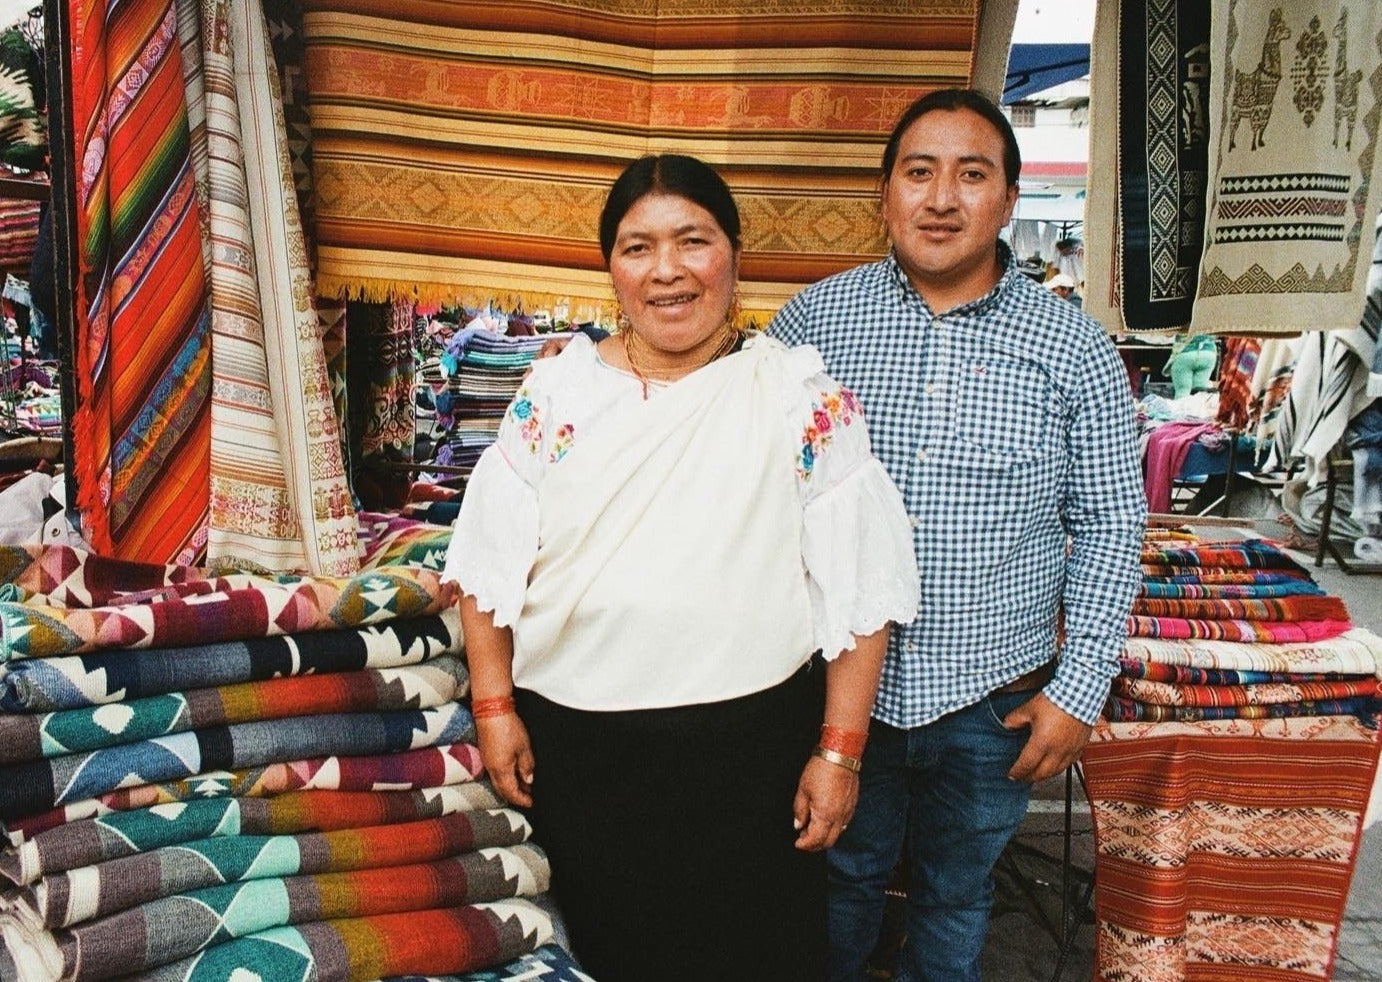 artisans of Ecuador stand outside at their marketplace by the handwoven textiles they sell.